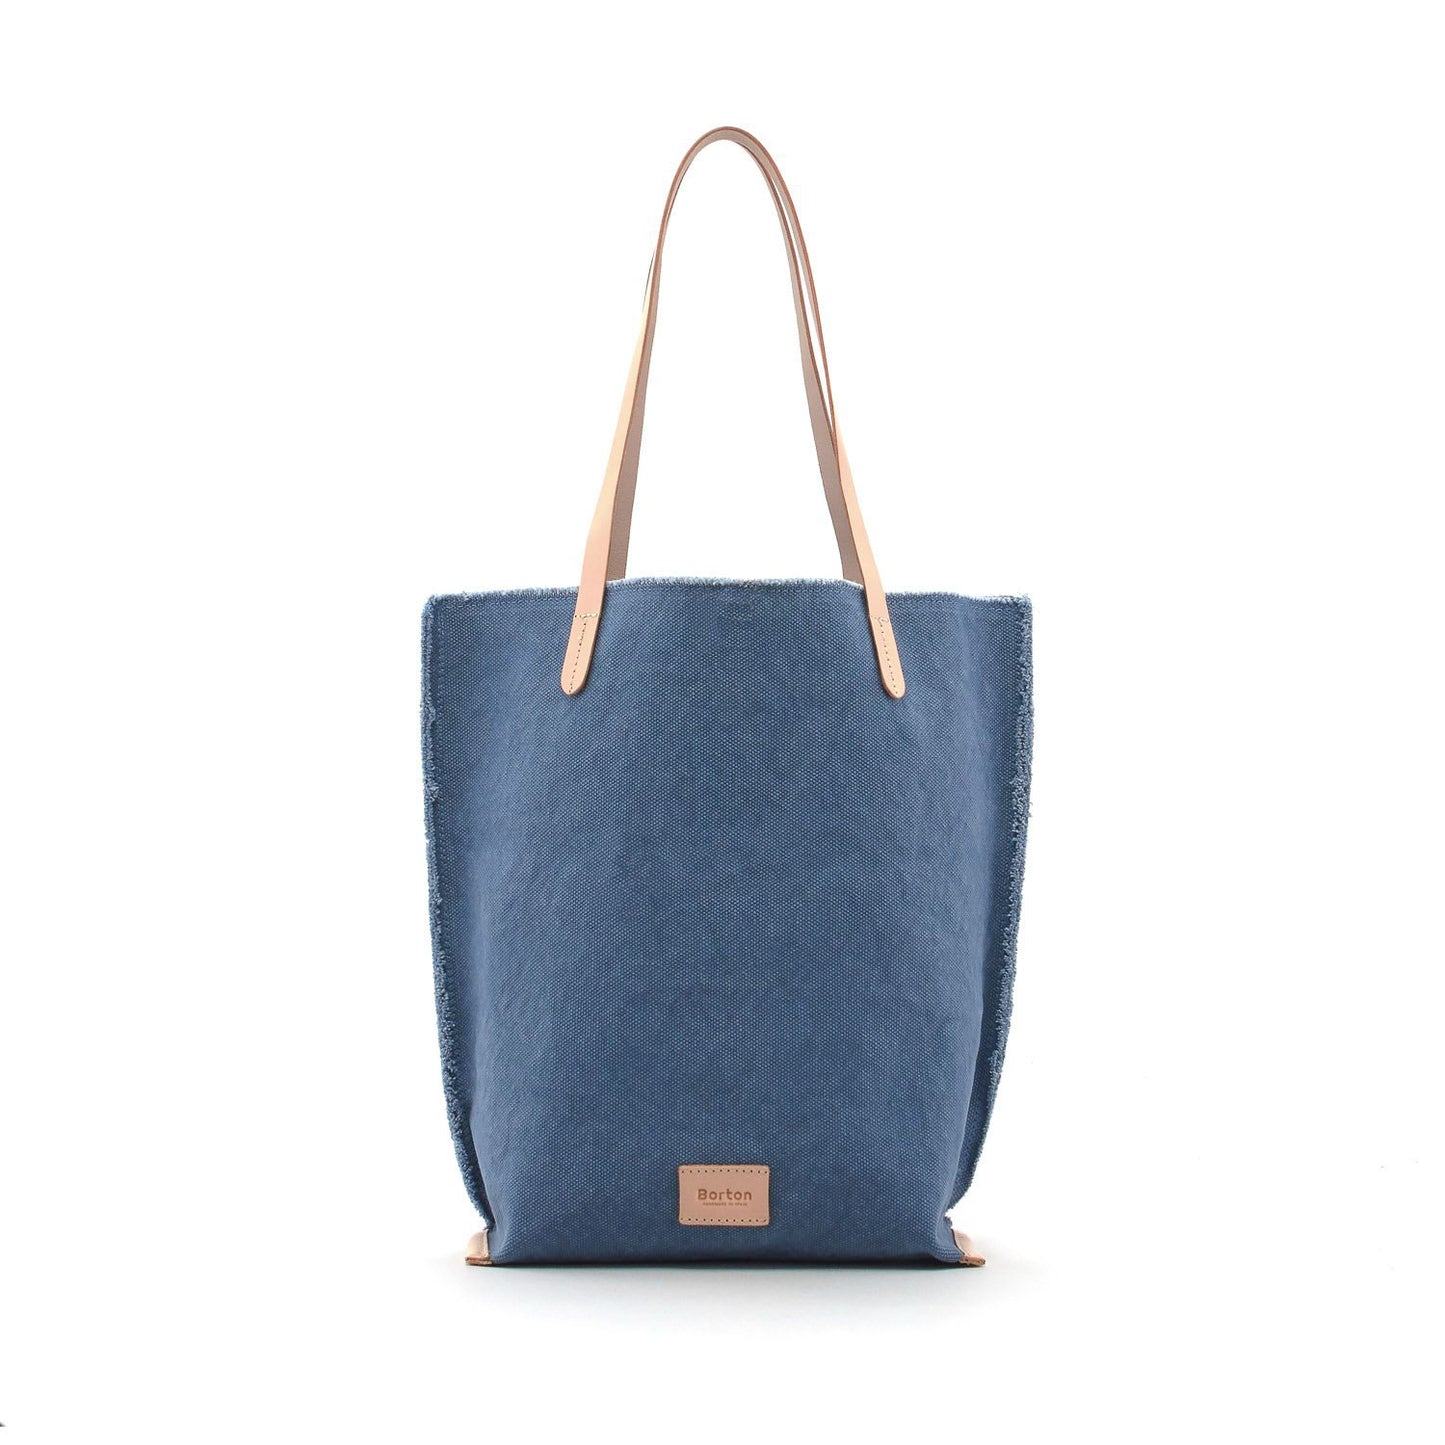 Mery Tote Bag Blue Canvas & Natural Leather